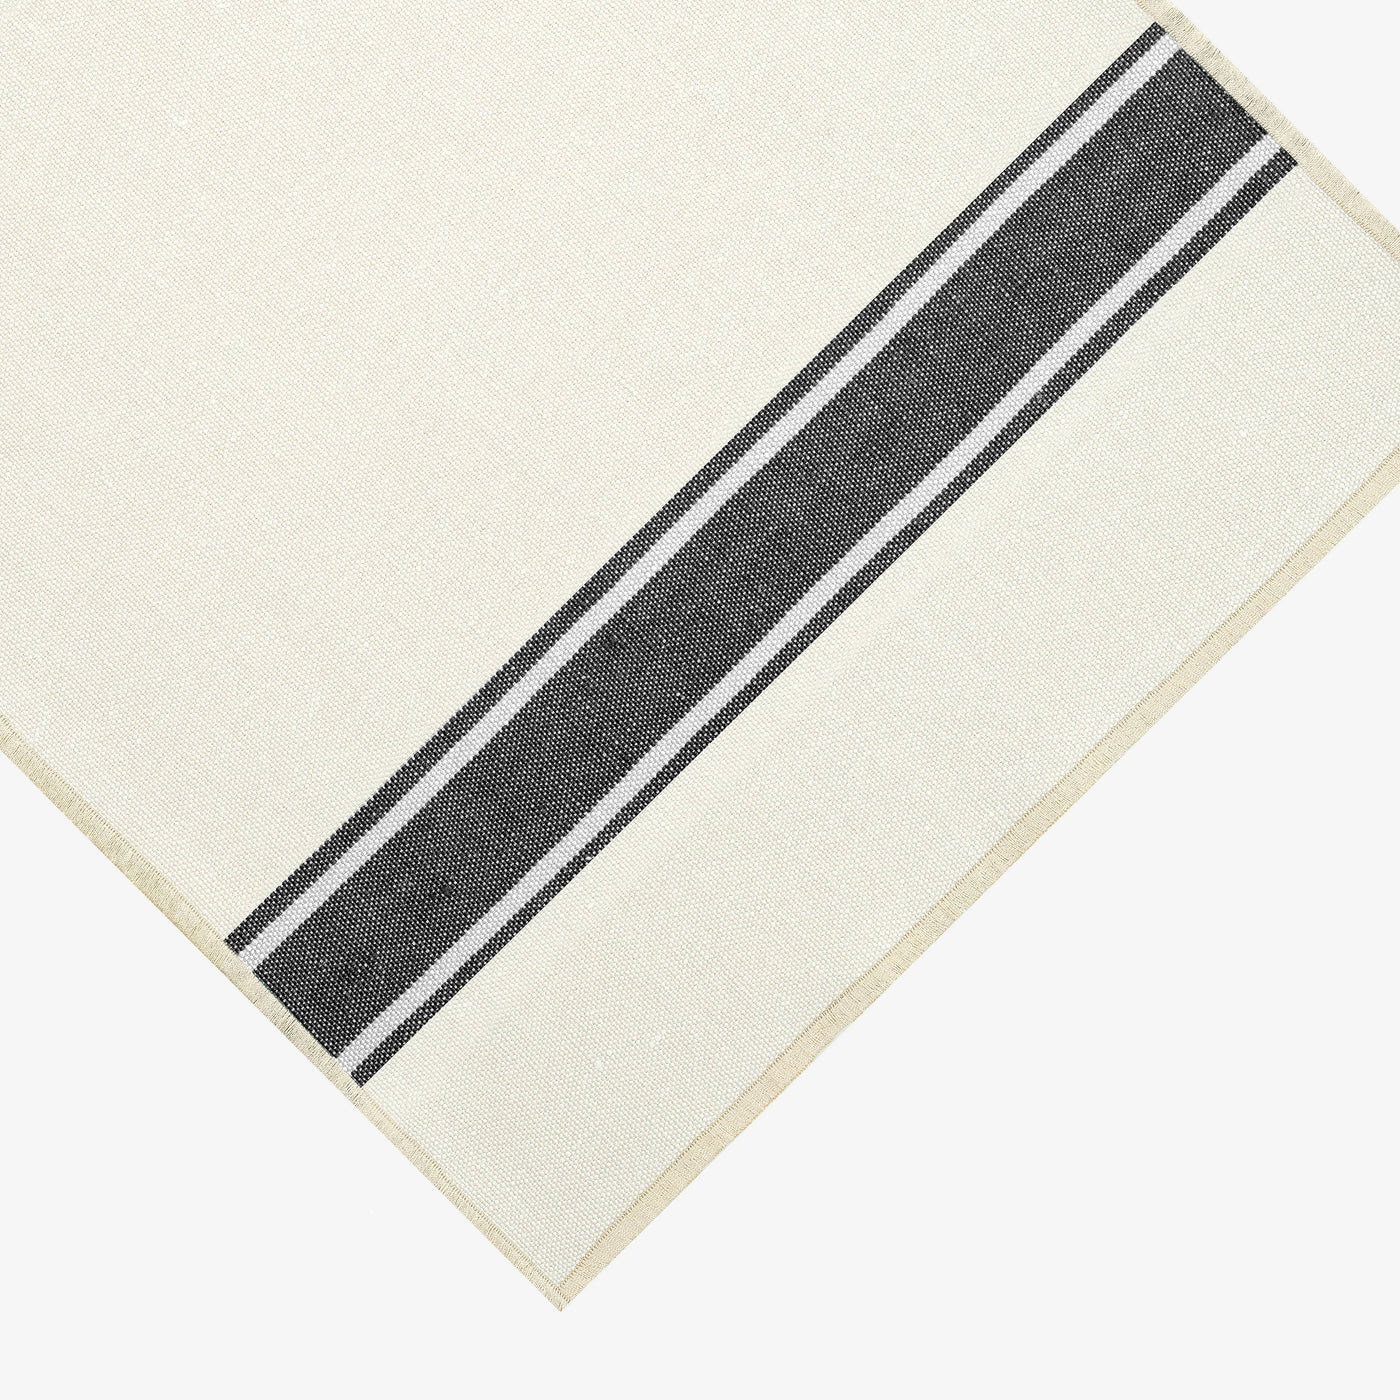 Mary Set of 2 Striped Placemats, Natural - Black, 35x46 cm 2